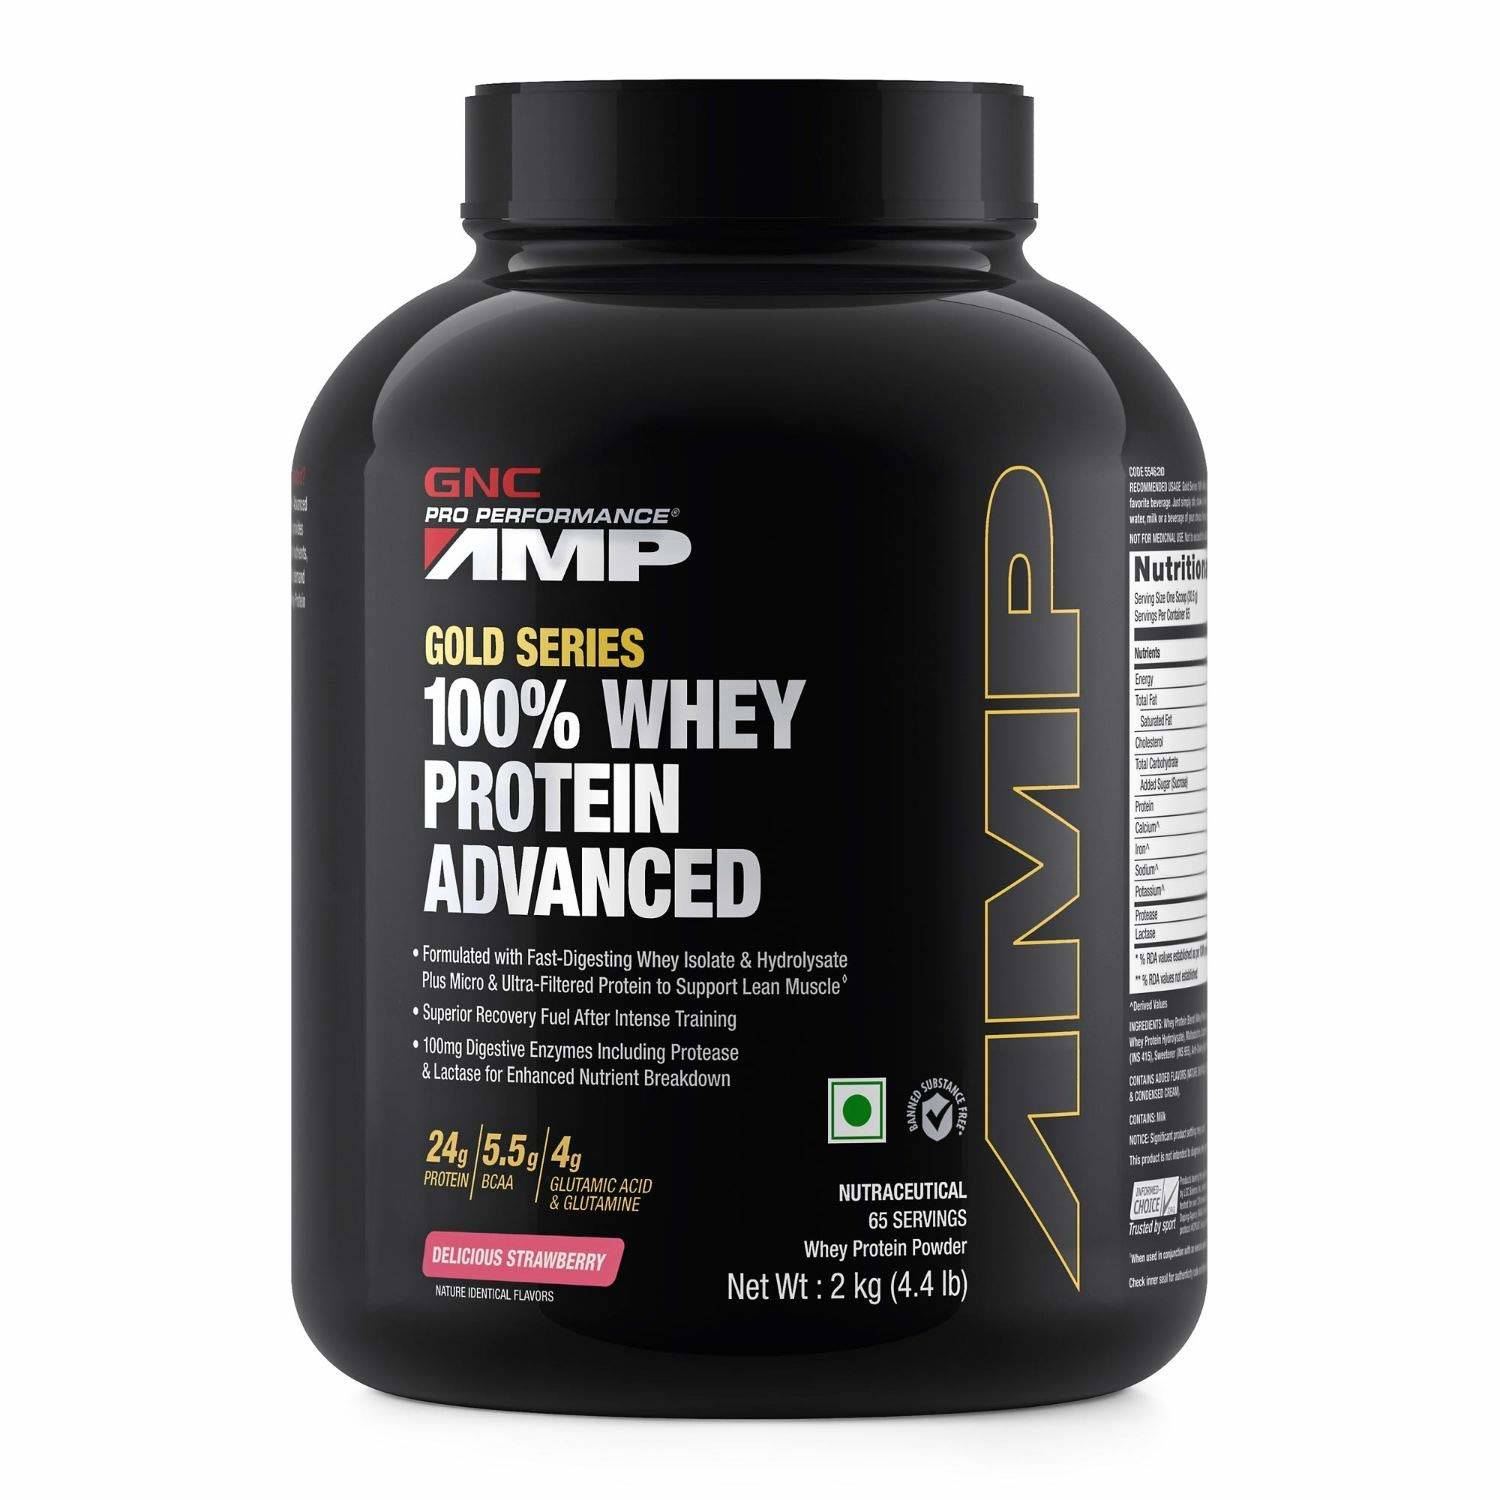 Top whey proteins by GNC | Business Insider India